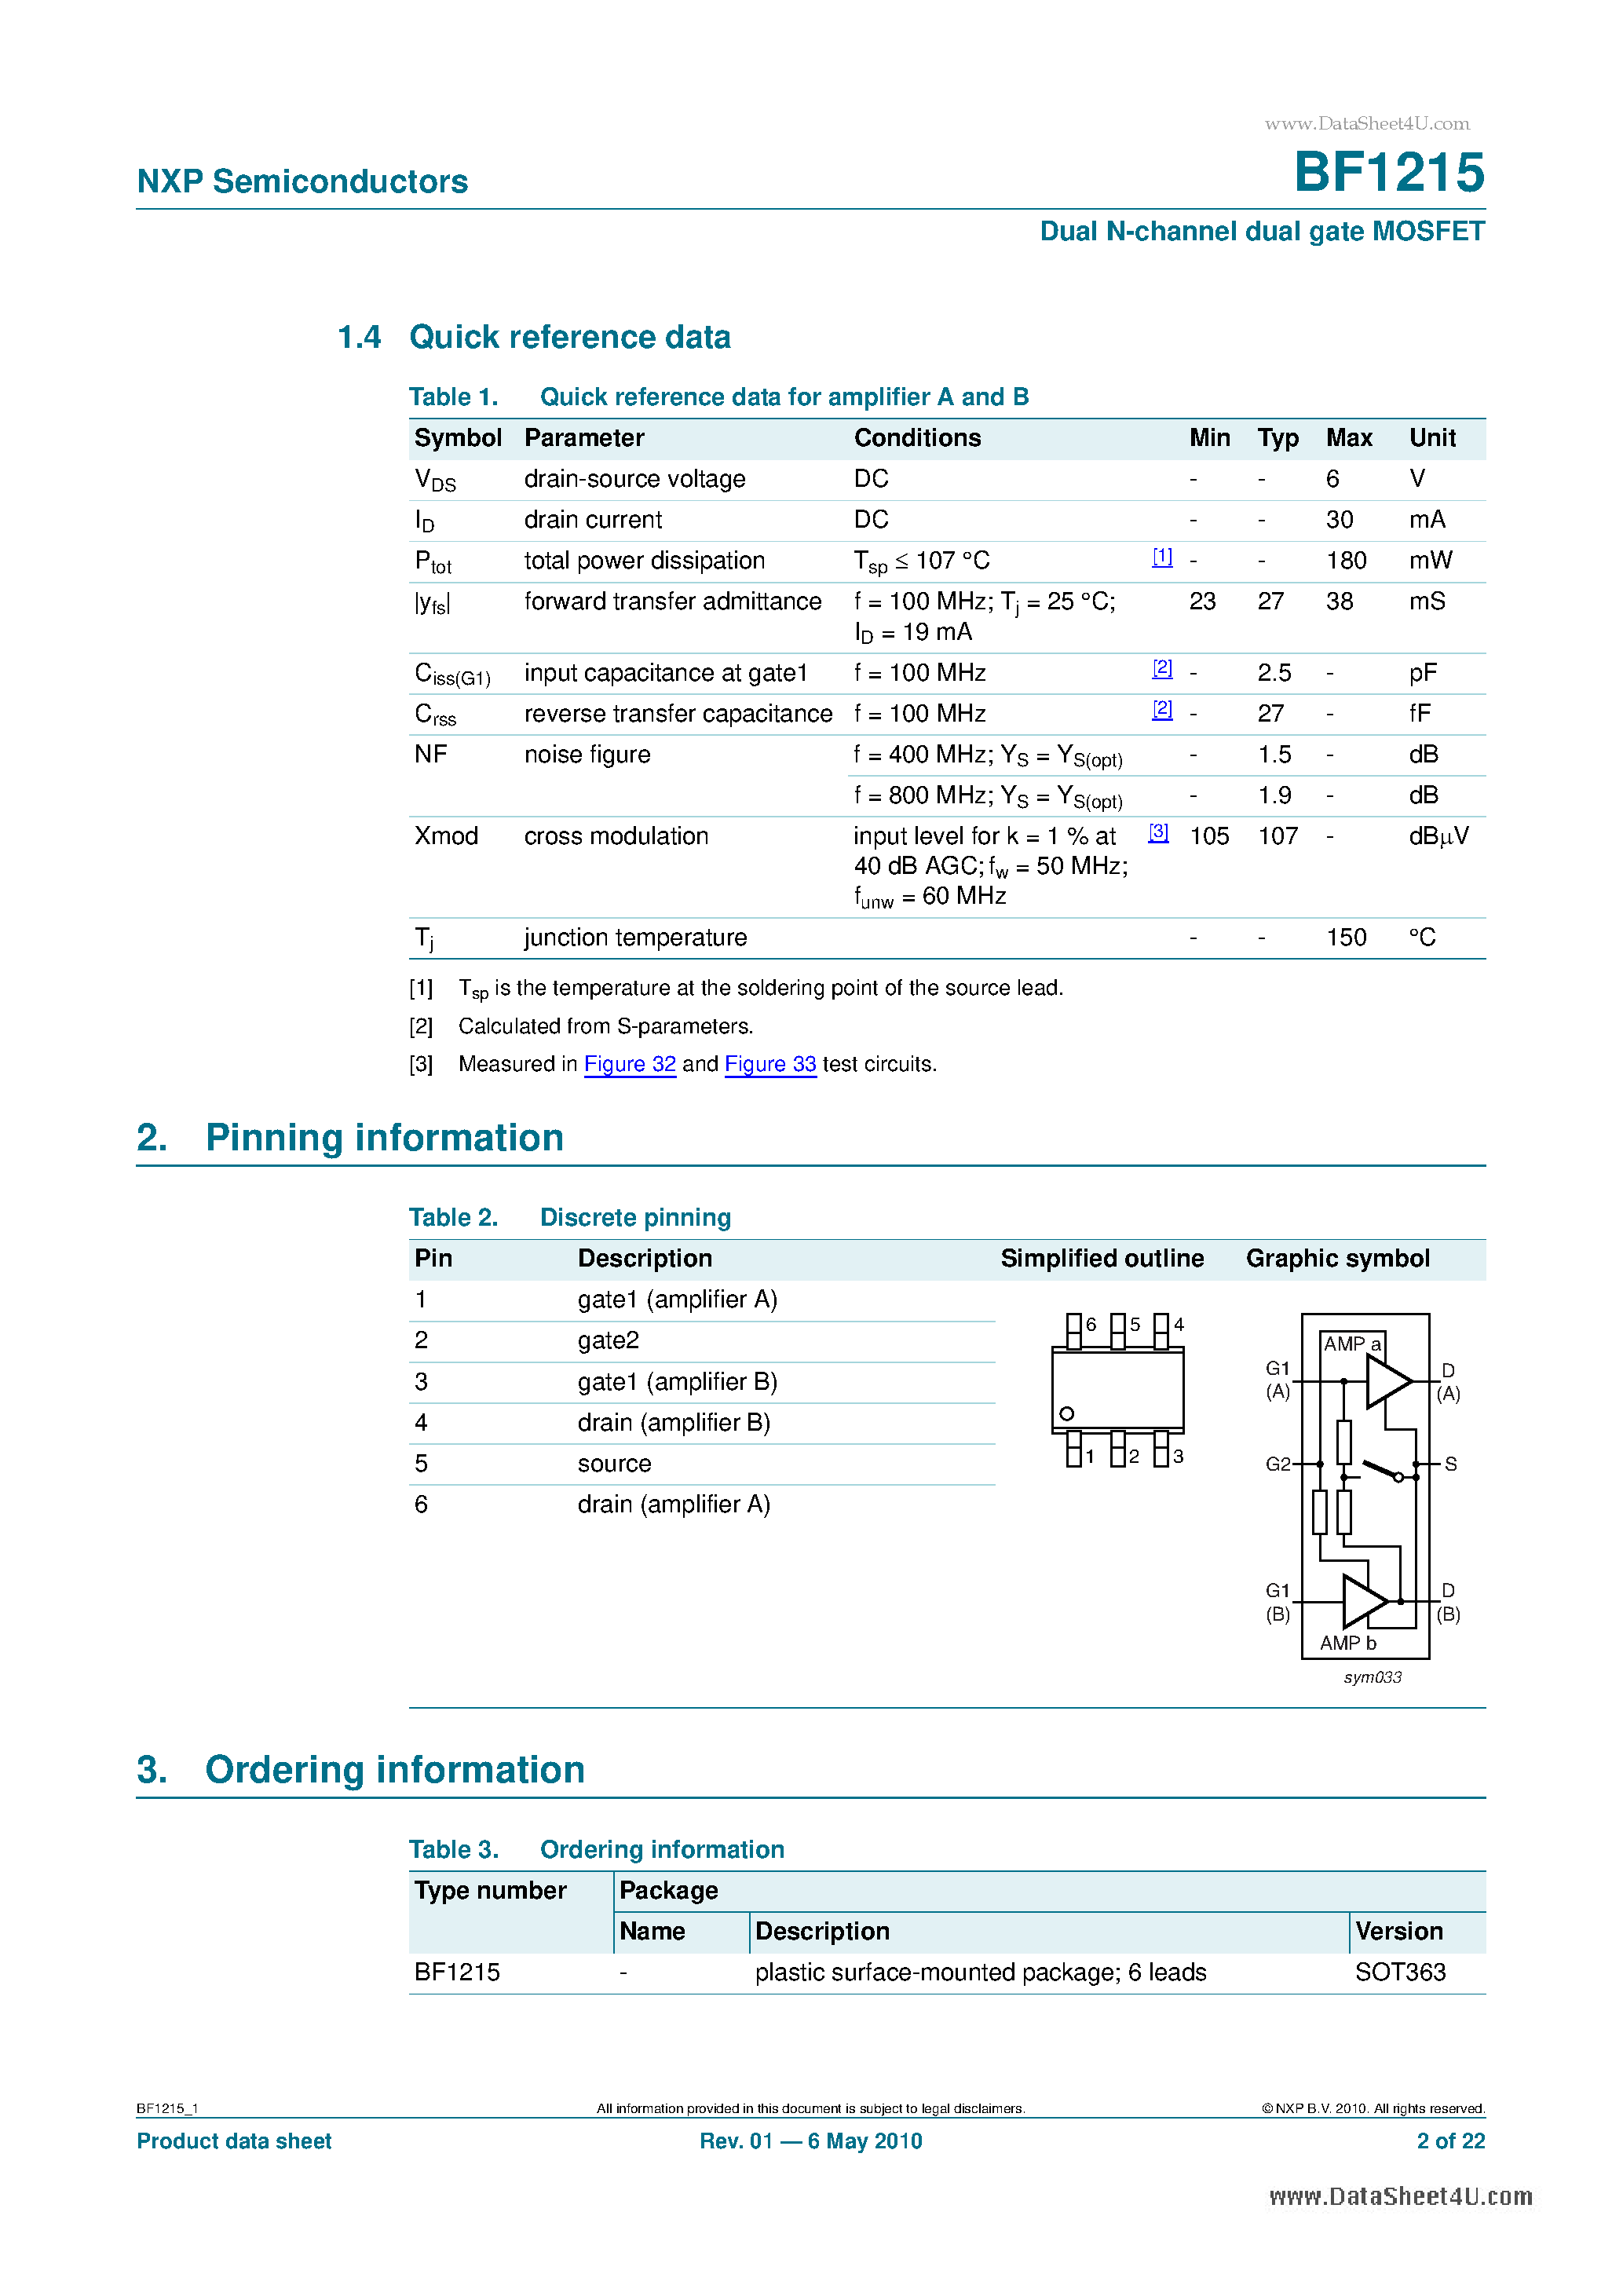 Datasheet BF1215 - Dual N-channel dual gate MOSFET page 2